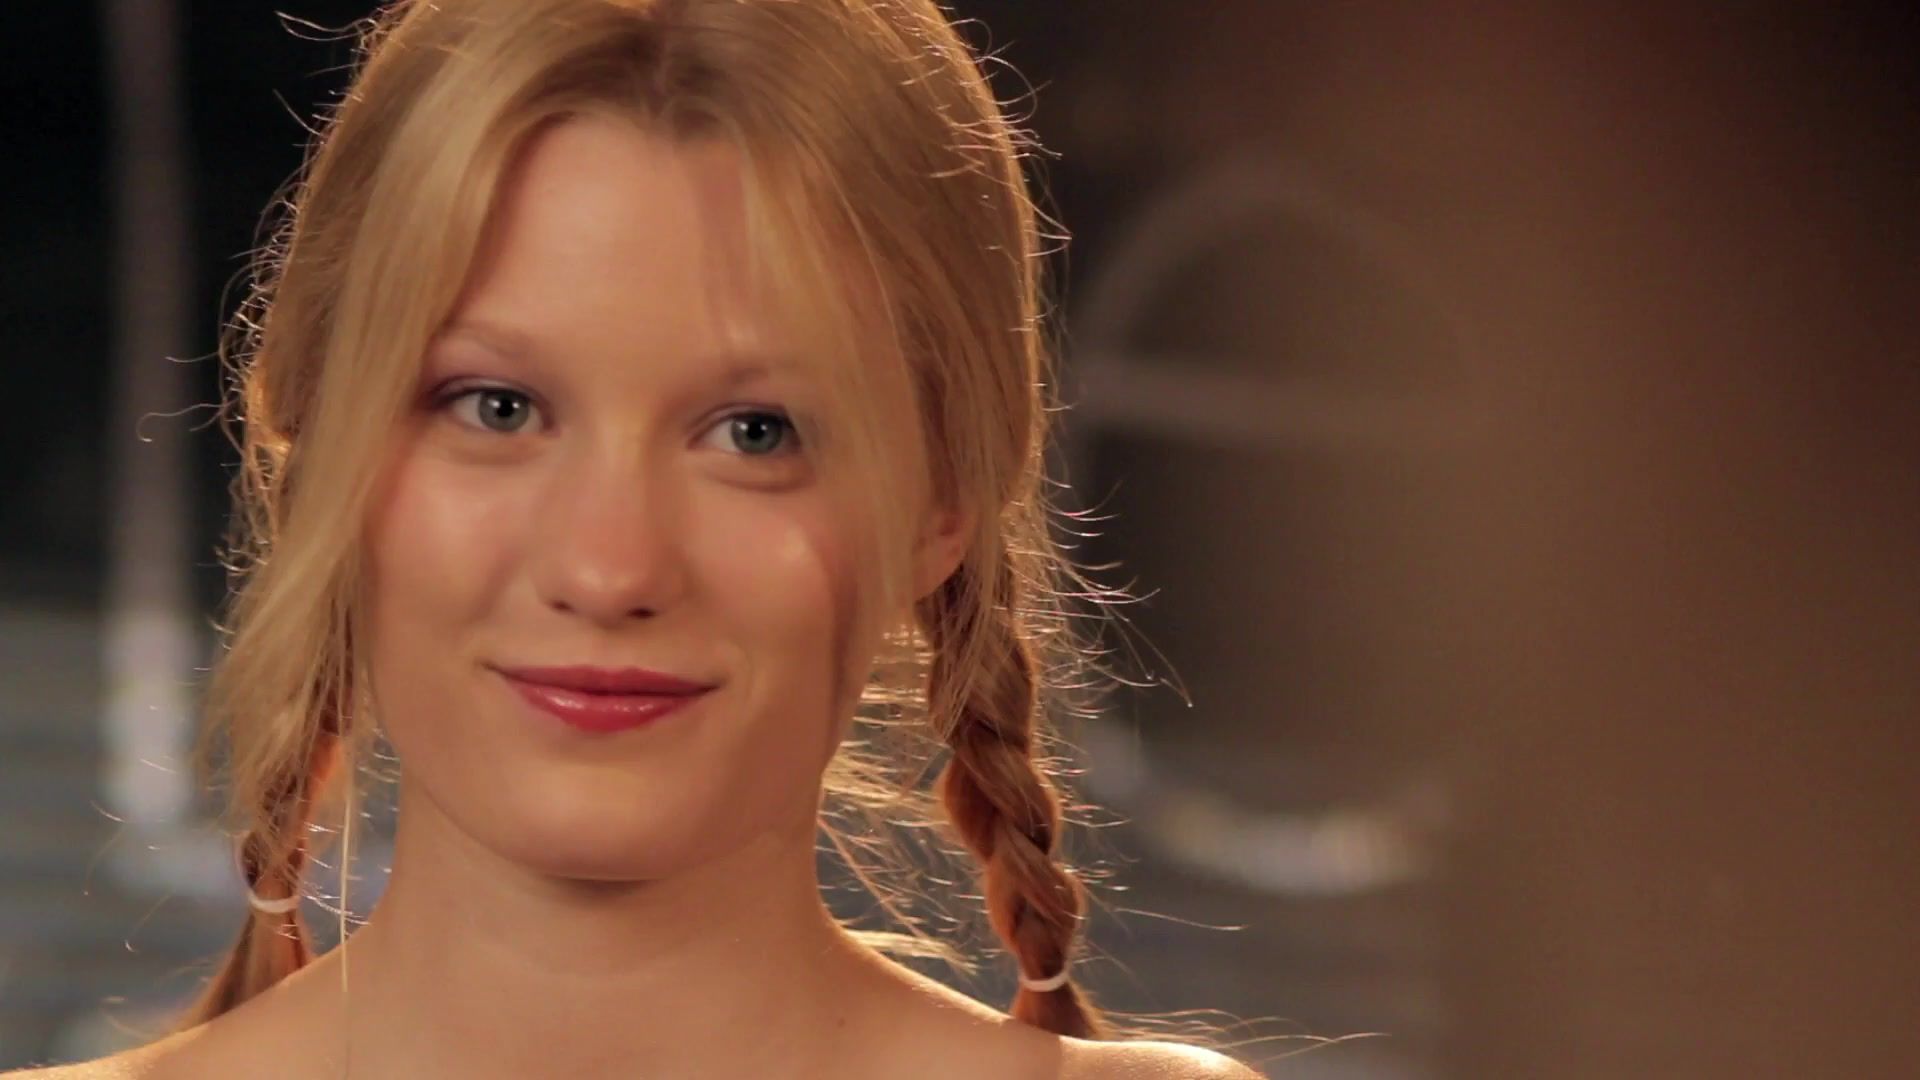 NXTComics Ashley Hinshaw - About Cherry (2012) Spooning